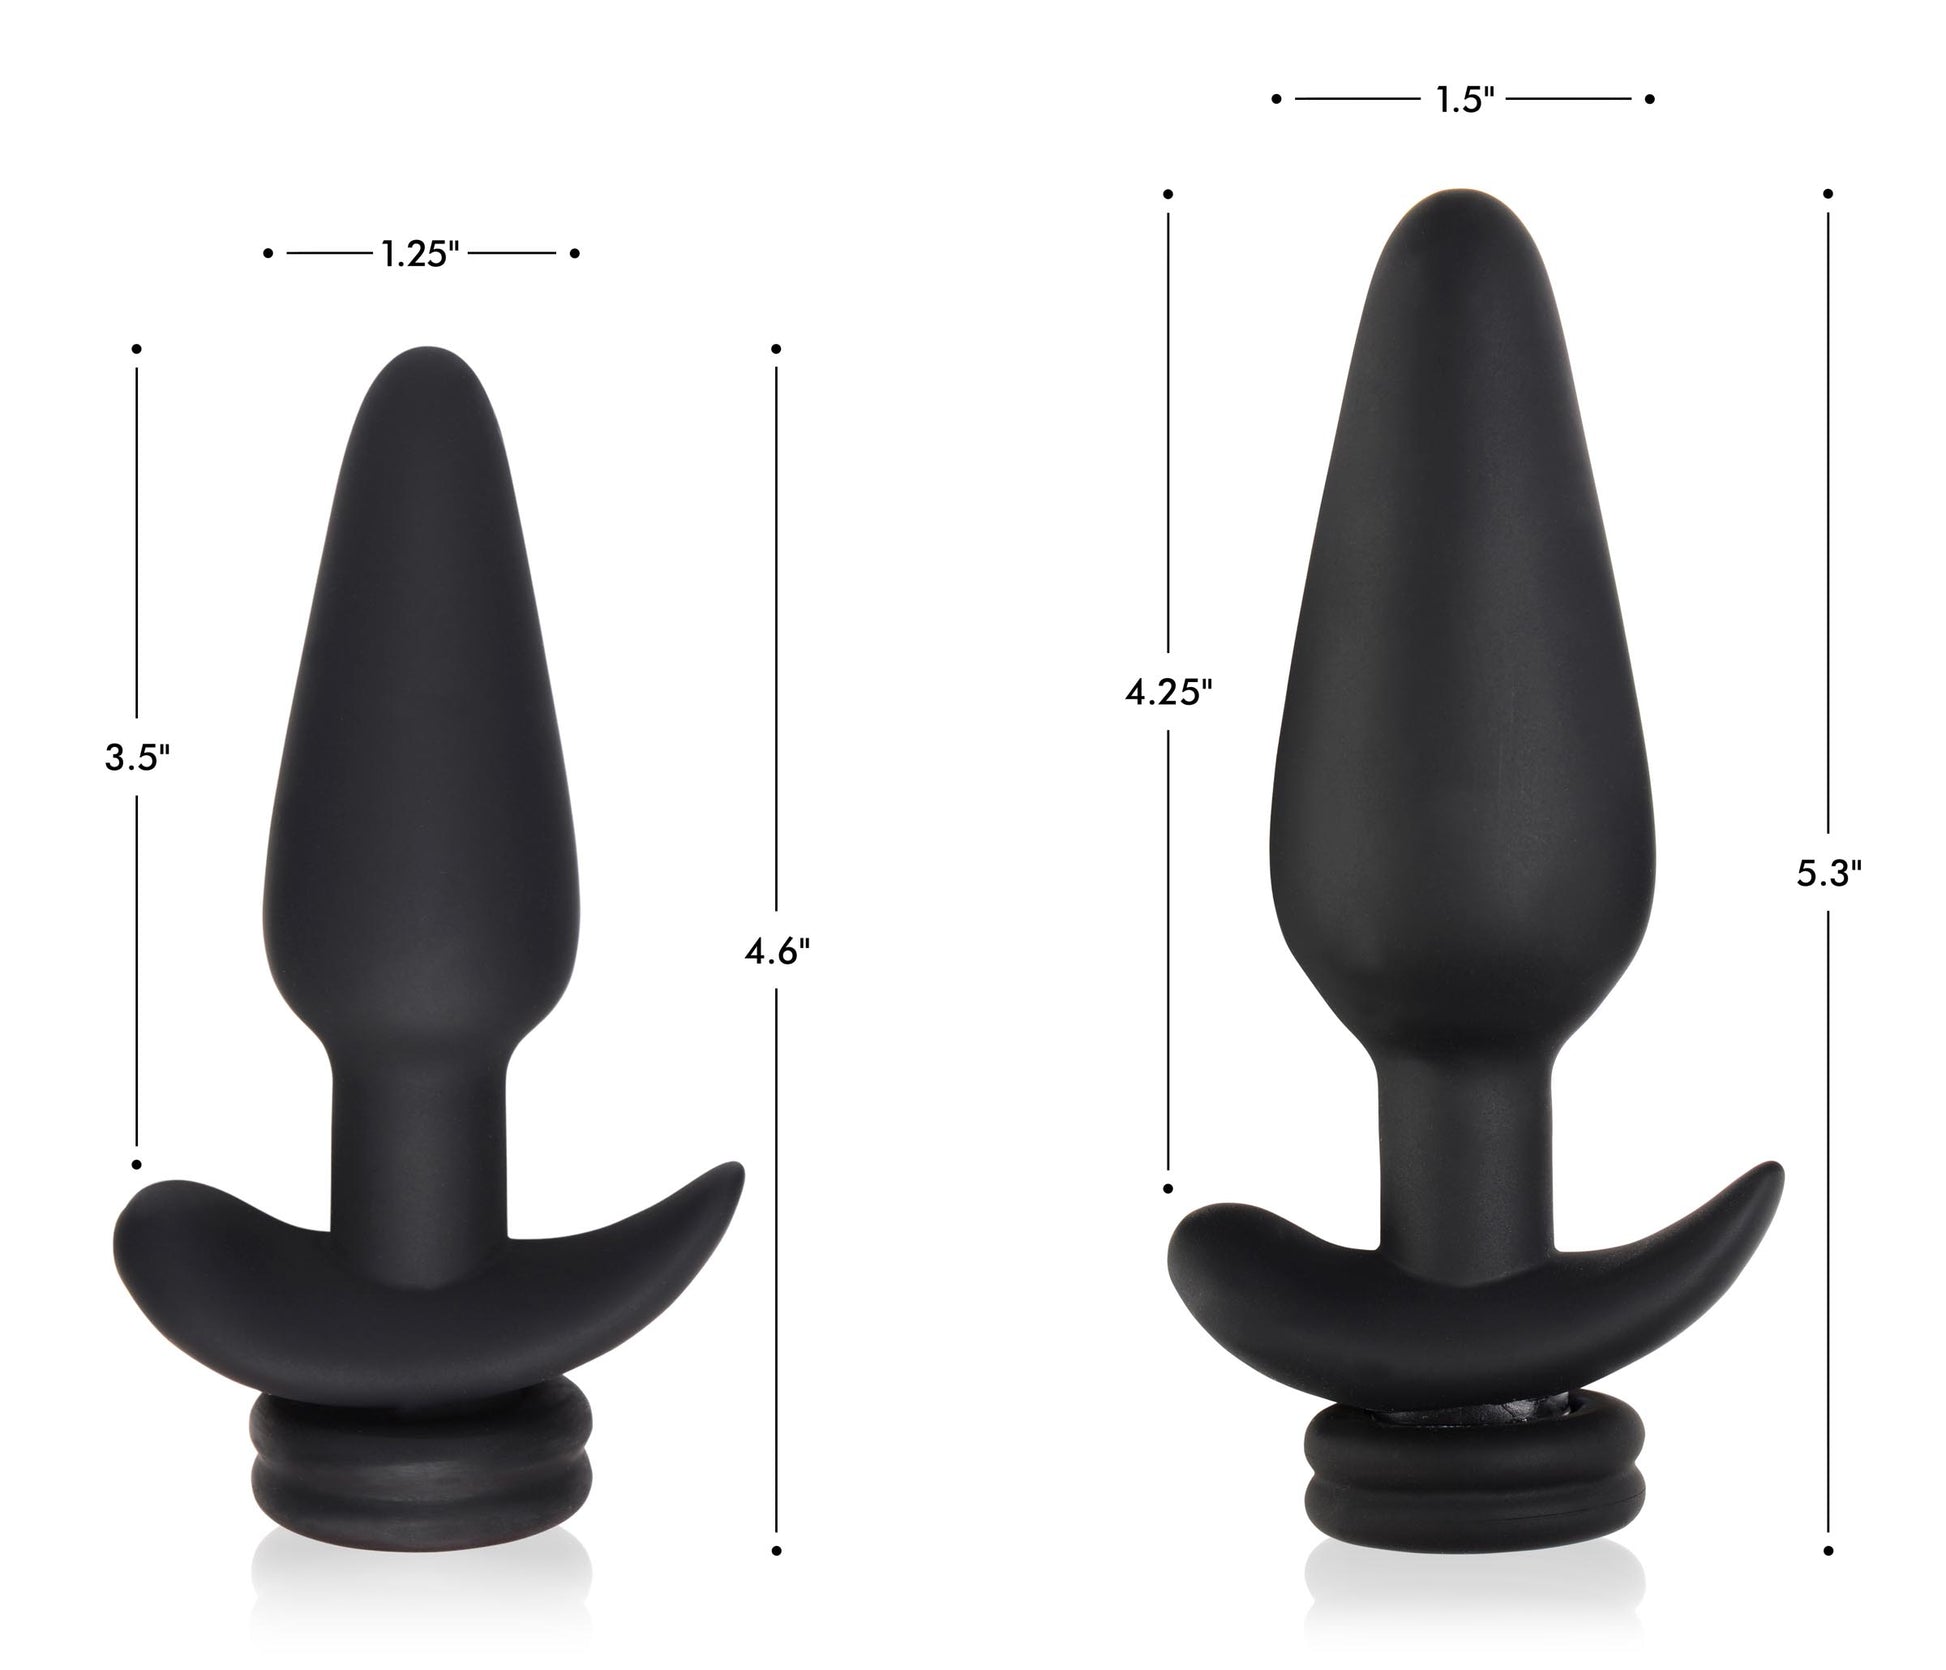 Small Vibrating Anal Plug with Interchangeable Fox Tail - Black and White - UABDSM